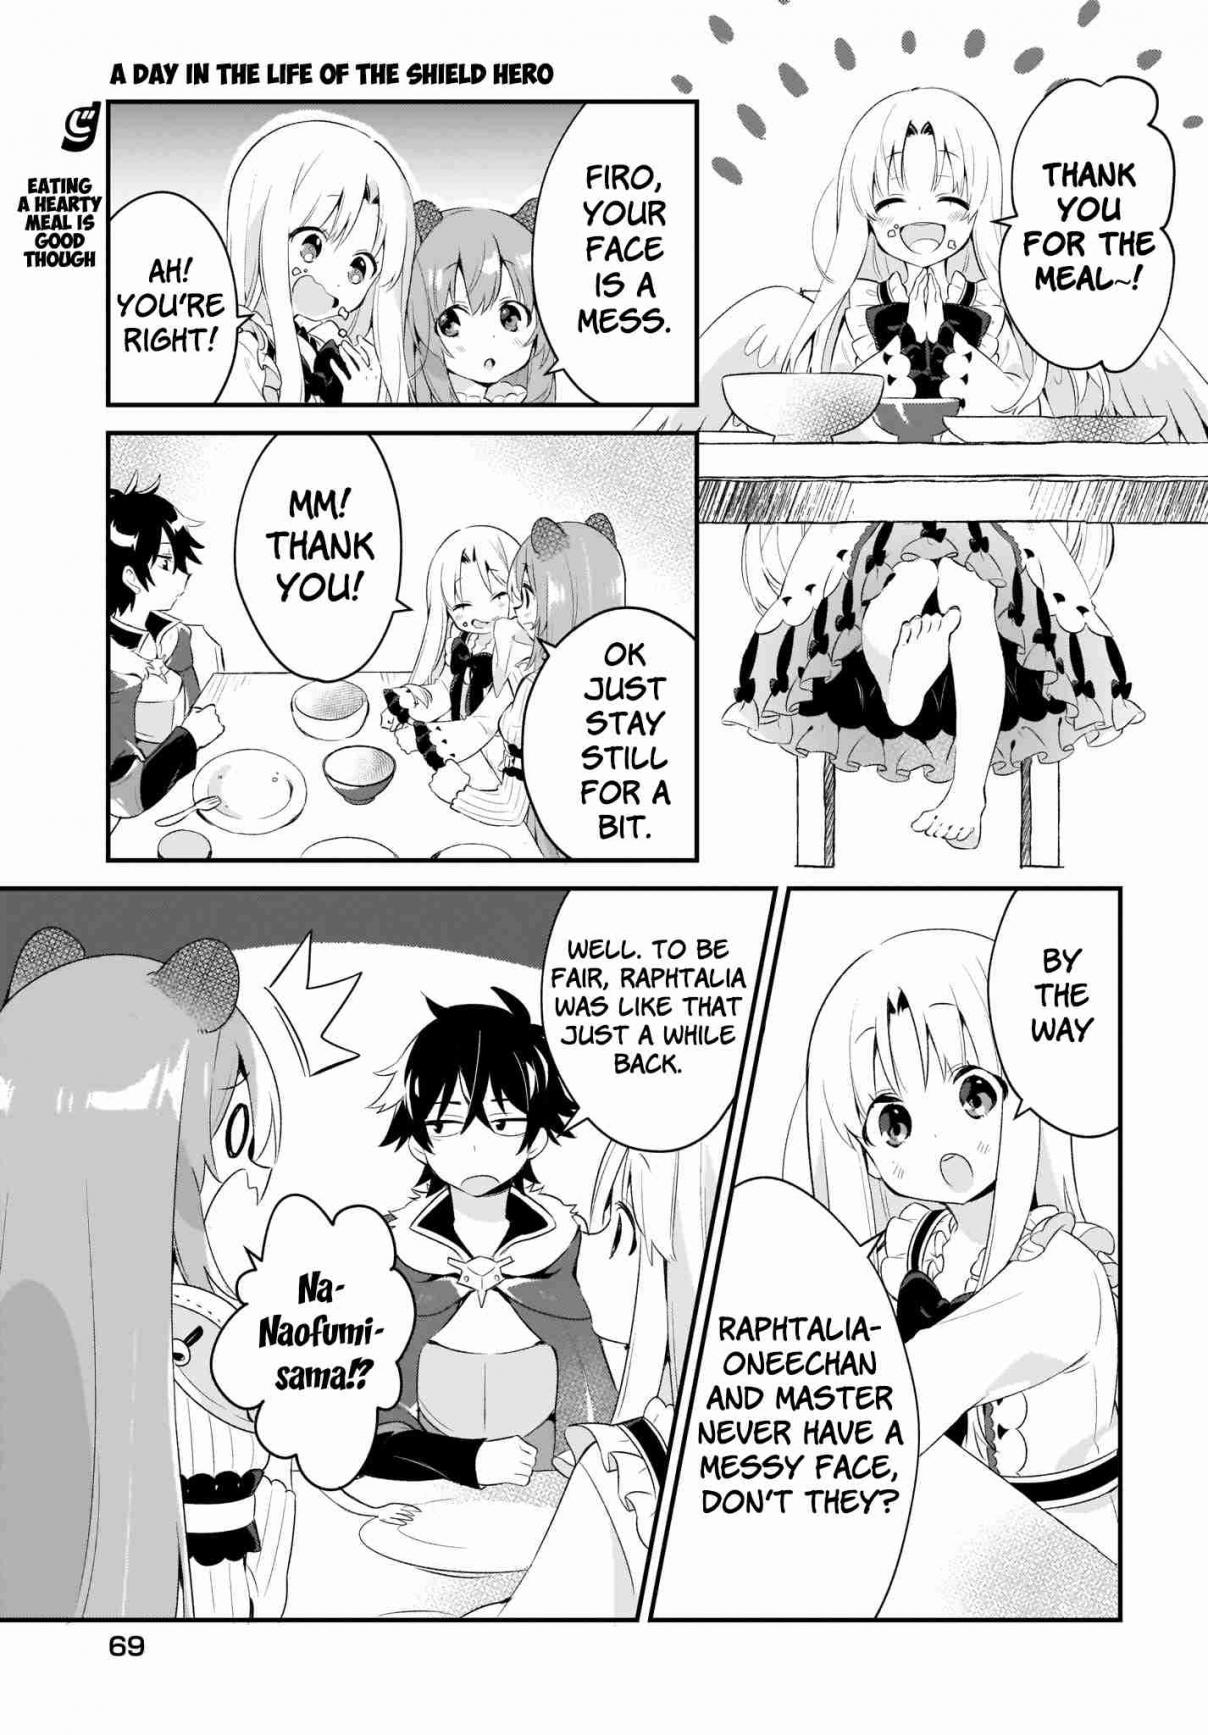 A day in the life of the shield hero Vol. 1 Ch. 2